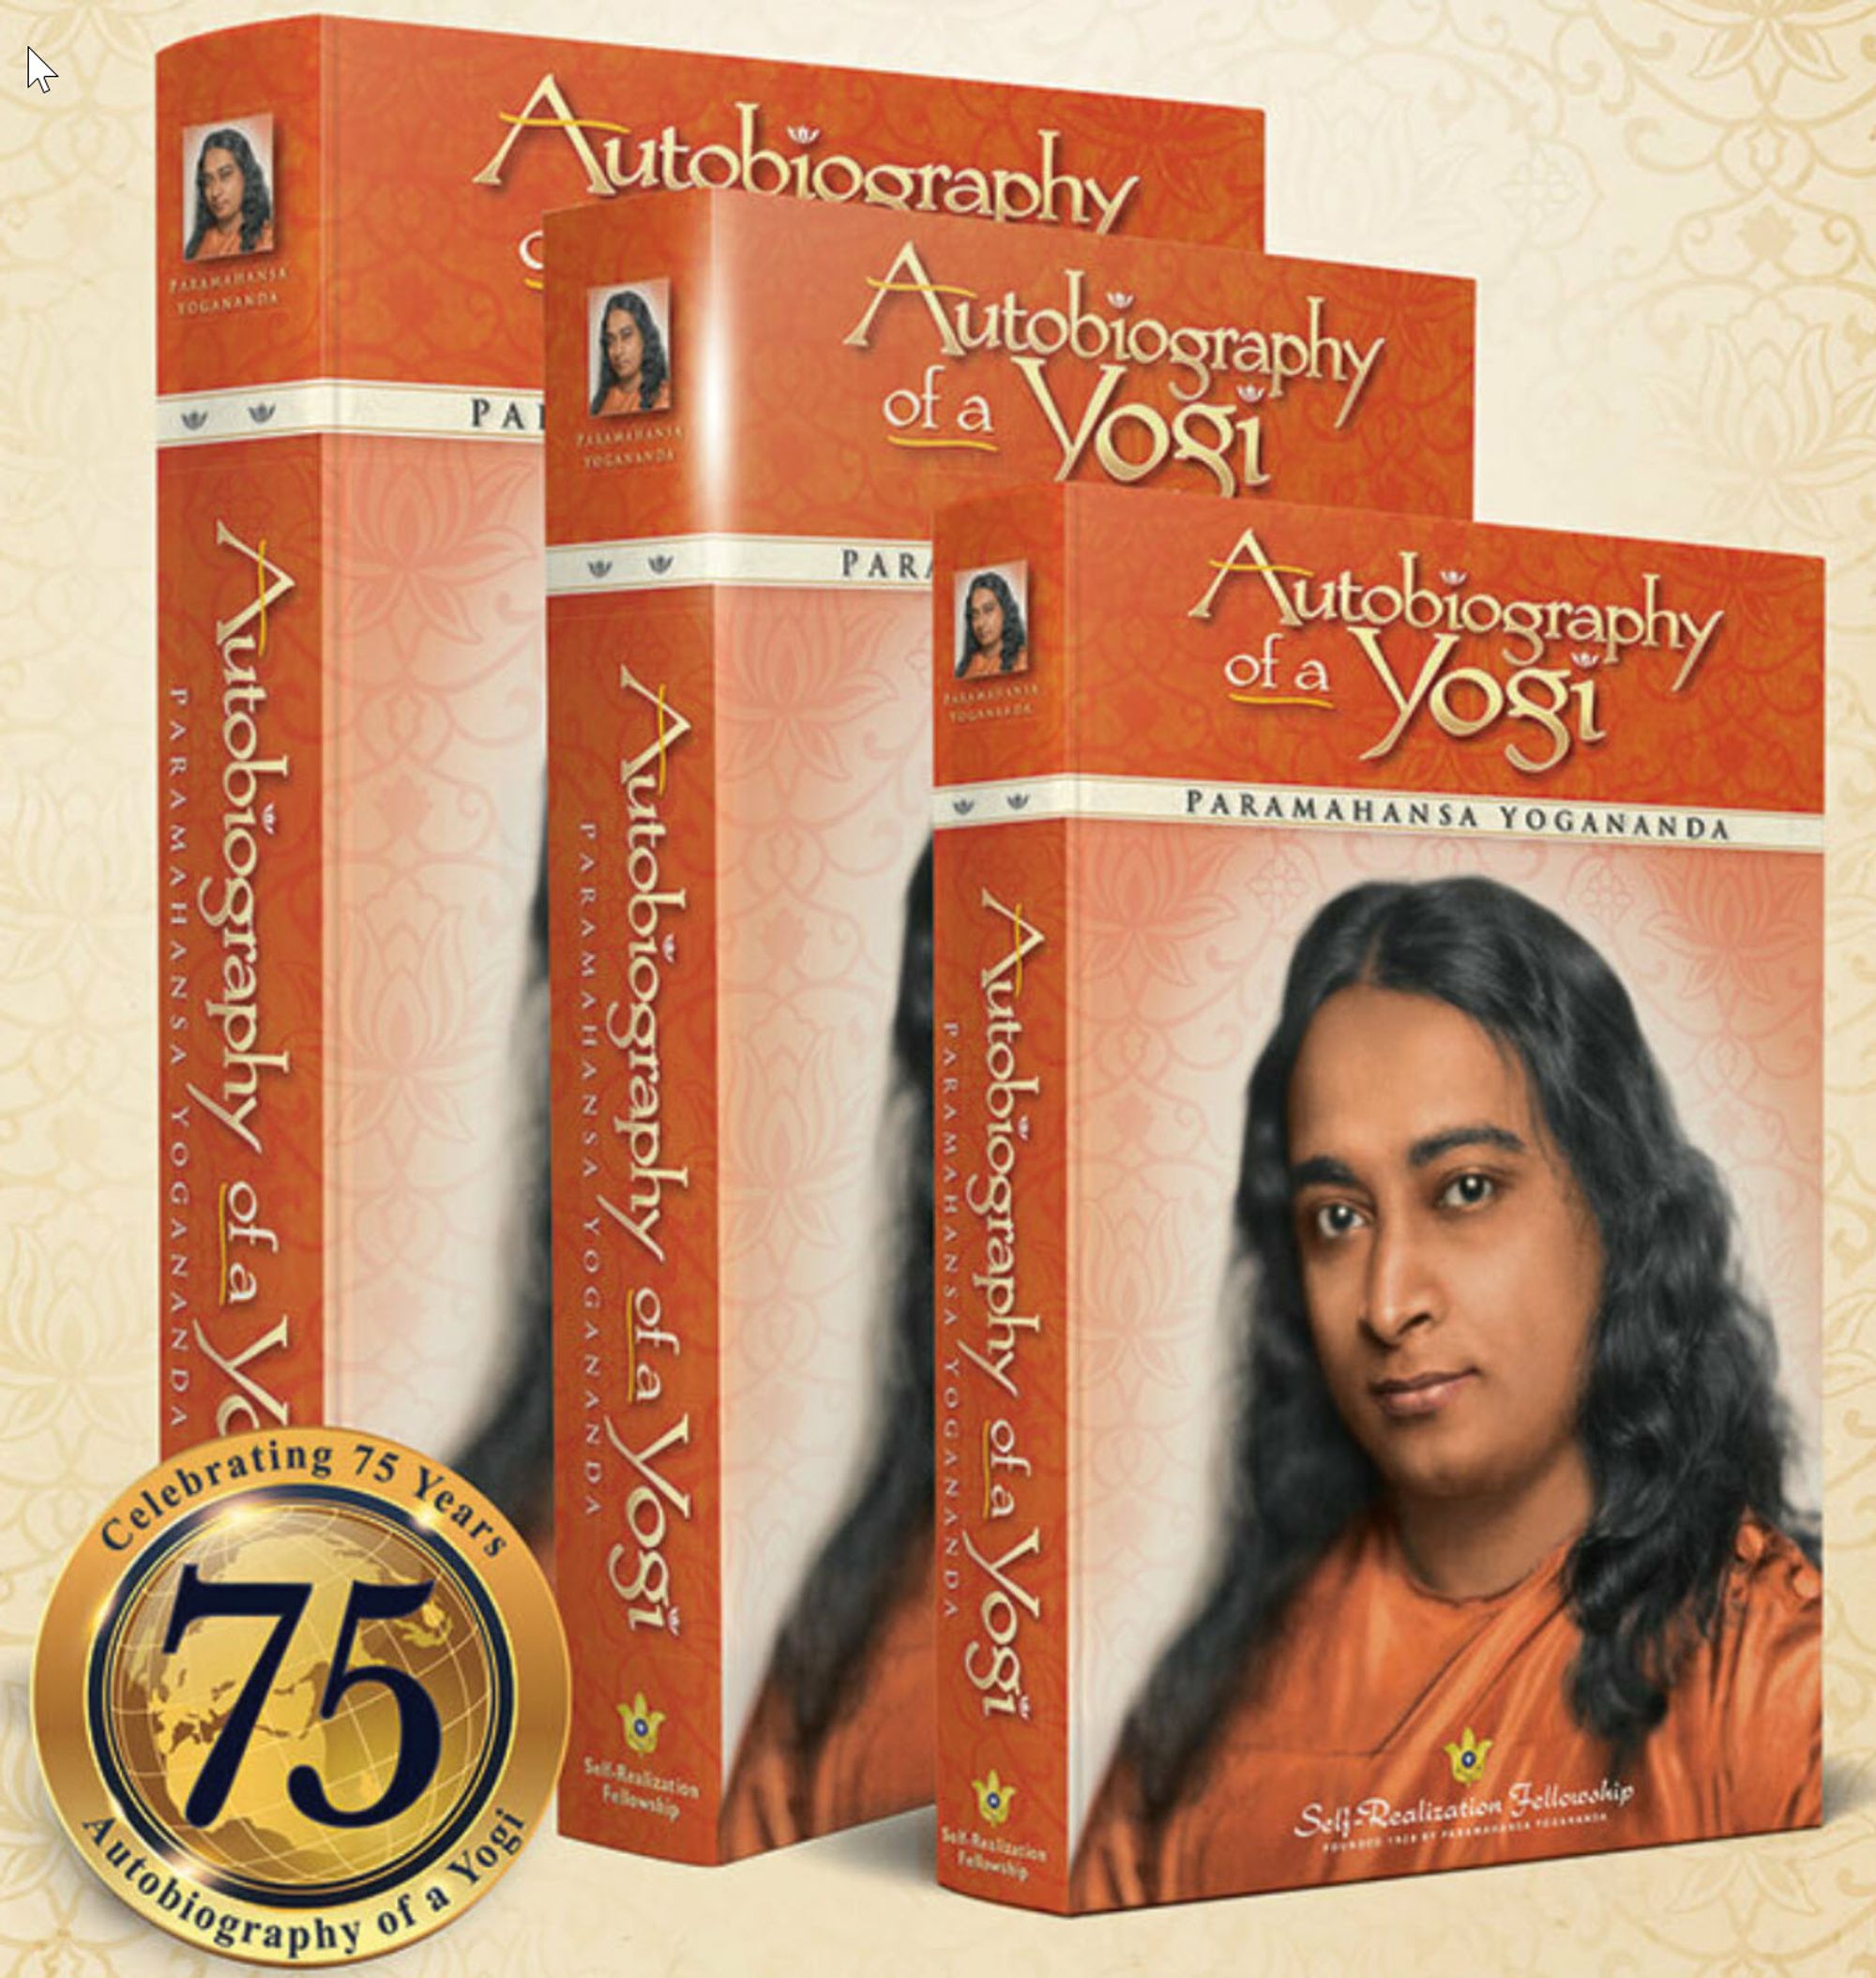 Paramahansa Yogananda’s spiritual classic, Autobiography of a Yogi, is available in our Bookroom, in bookstores, public libraries, and is now available online.  Click here for more details.